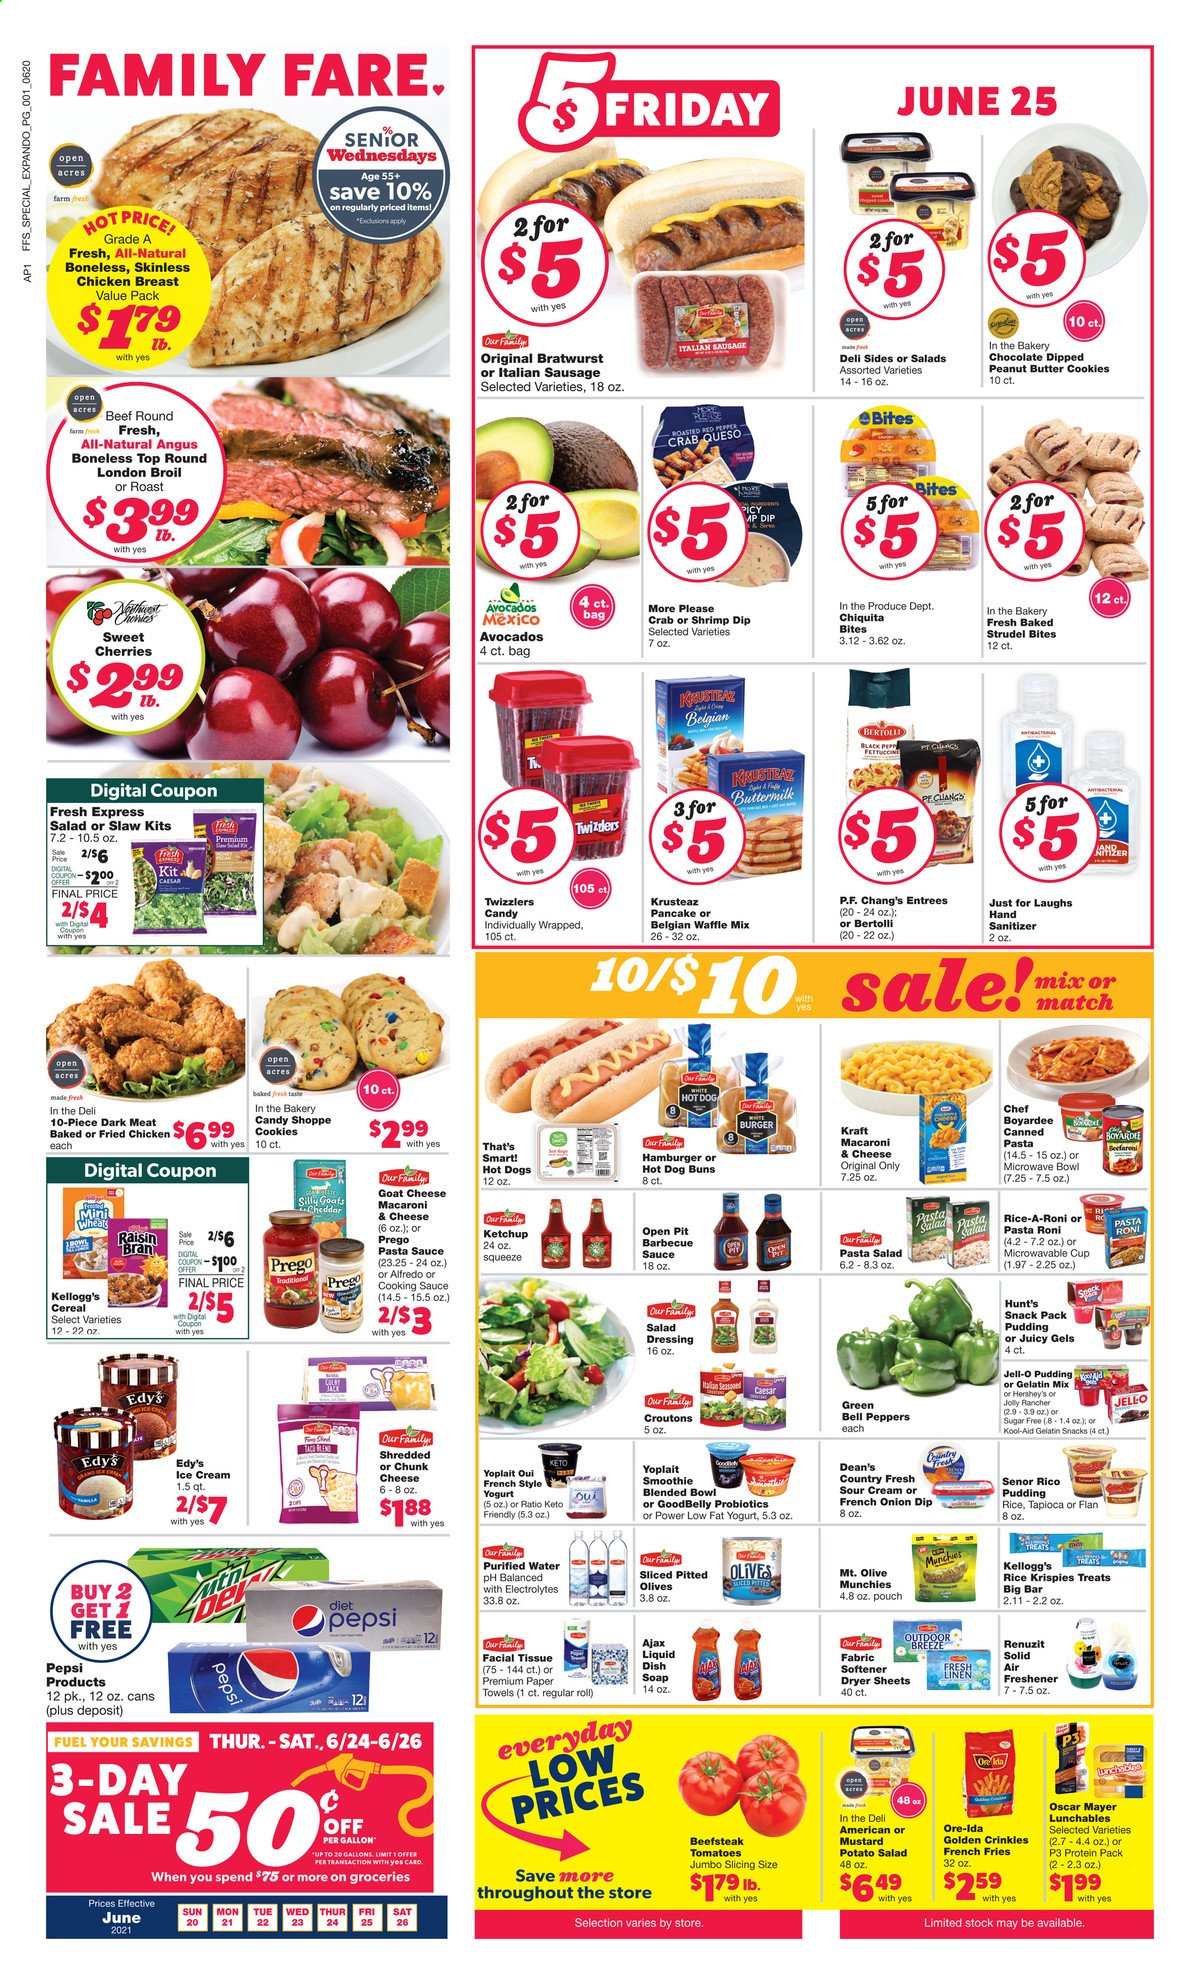 thumbnail - Family Fare Flyer - 06/20/2021 - 06/26/2021 - Sales products - strudel, buns, bell peppers, tomatoes, peppers, cherries, crab, shrimps, macaroni & cheese, pasta sauce, sauce, fried chicken, pancakes, Lunchables, Kraft®, Bertolli, Oscar Mayer, bratwurst, sausage, italian sausage, potato salad, pasta salad, goat cheese, chunk cheese, pudding, yoghurt, Yoplait, buttermilk, sour cream, dip, ice cream, Hershey's, potato fries, french fries, Ore-Ida, cookies, butter cookies, Kellogg's, croutons, Jell-O, olives, Chef Boyardee, cereals, Rice Krispies, Raisin Bran, BBQ sauce, mustard, salad dressing, ketchup, dressing, Pepsi, smoothie, purified water, chicken breasts, tissues, kitchen towels, paper towels, Ajax, fabric softener, dryer sheets, soap, gallon, cup, Renuzit, air freshener, probiotics. Page 1.